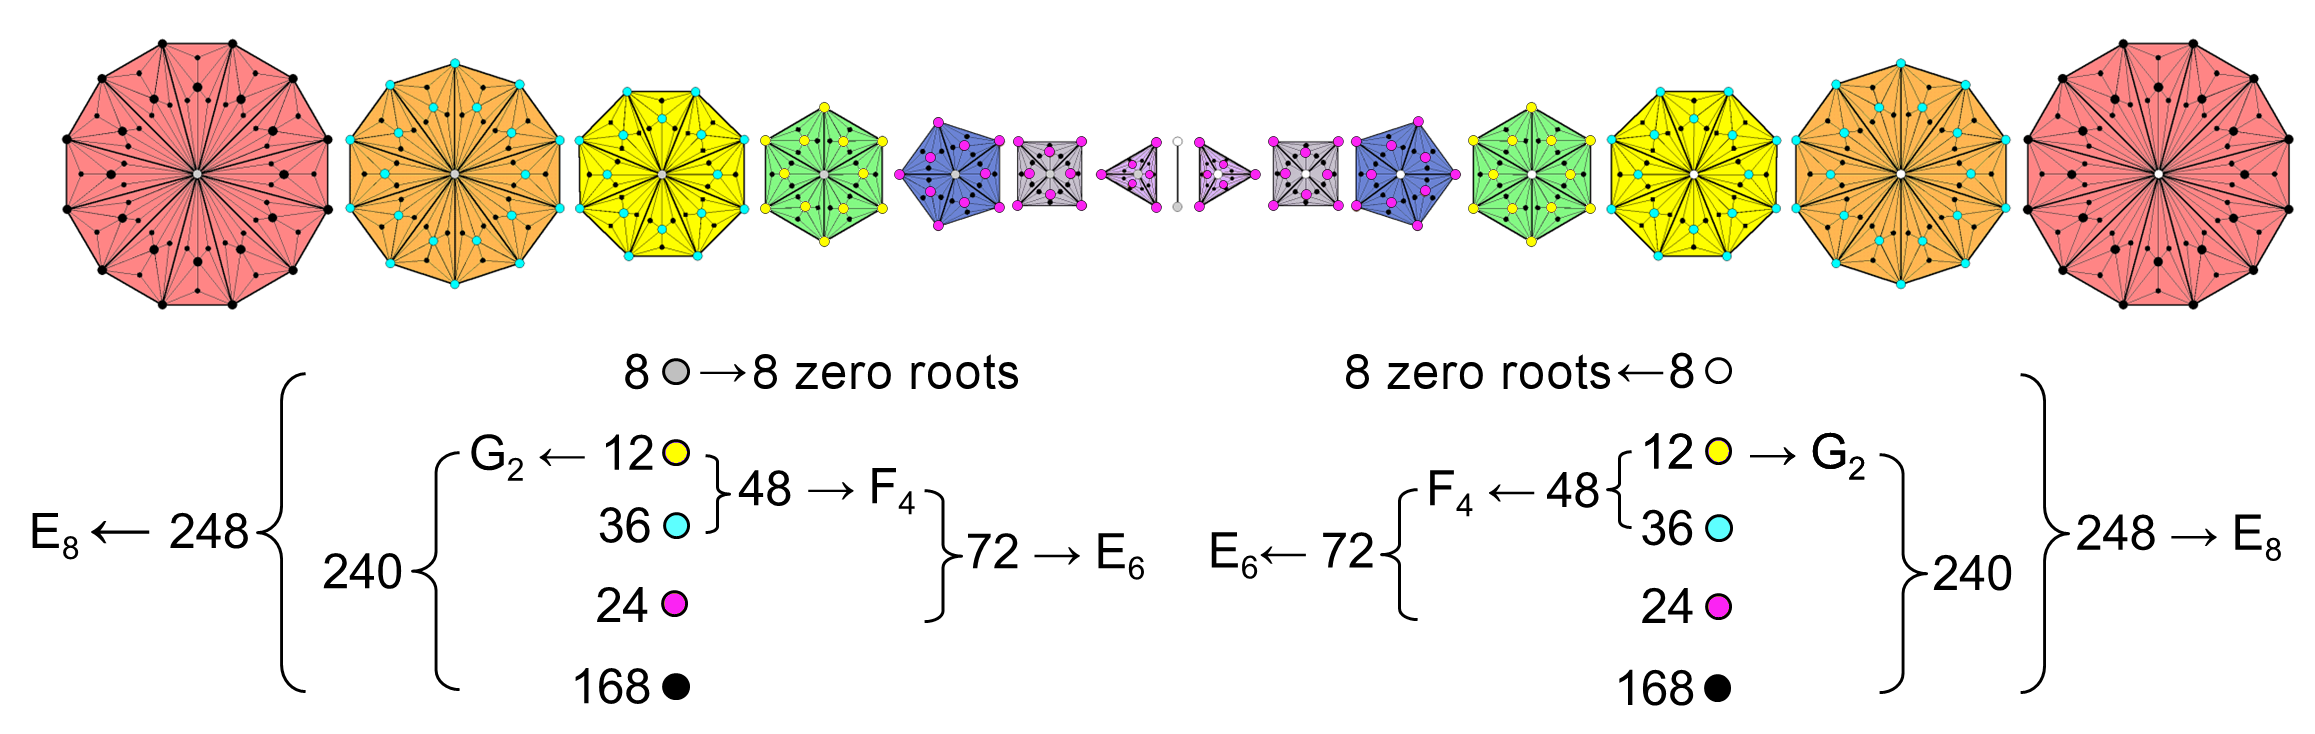 Exceptional subgroup patterns in 248+248 corners of 7+7 Type C polygons